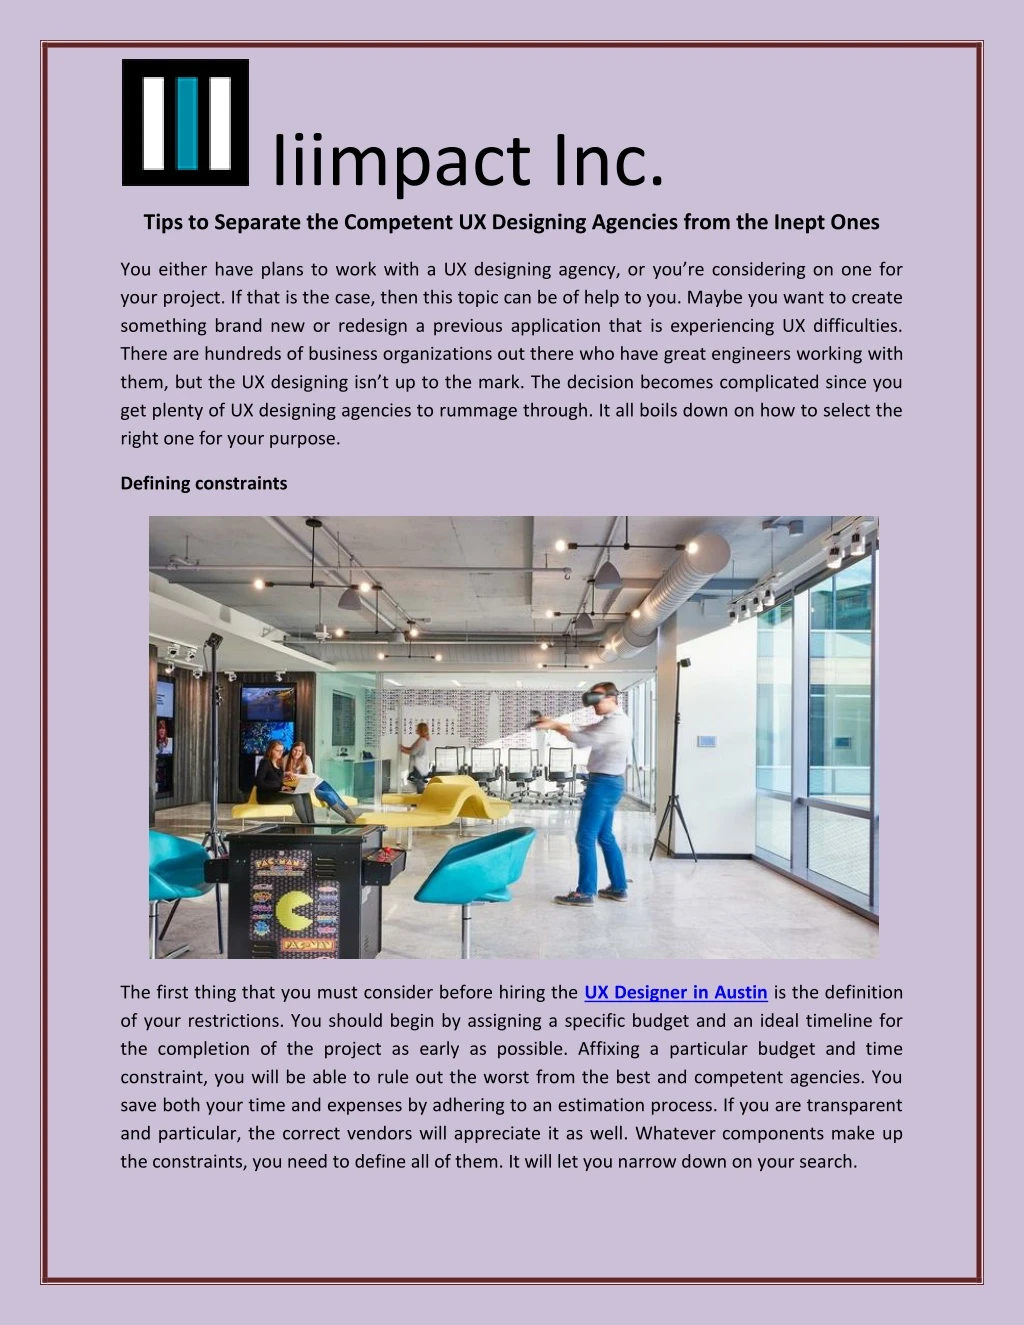 iiimpact inc tips to separate the competent